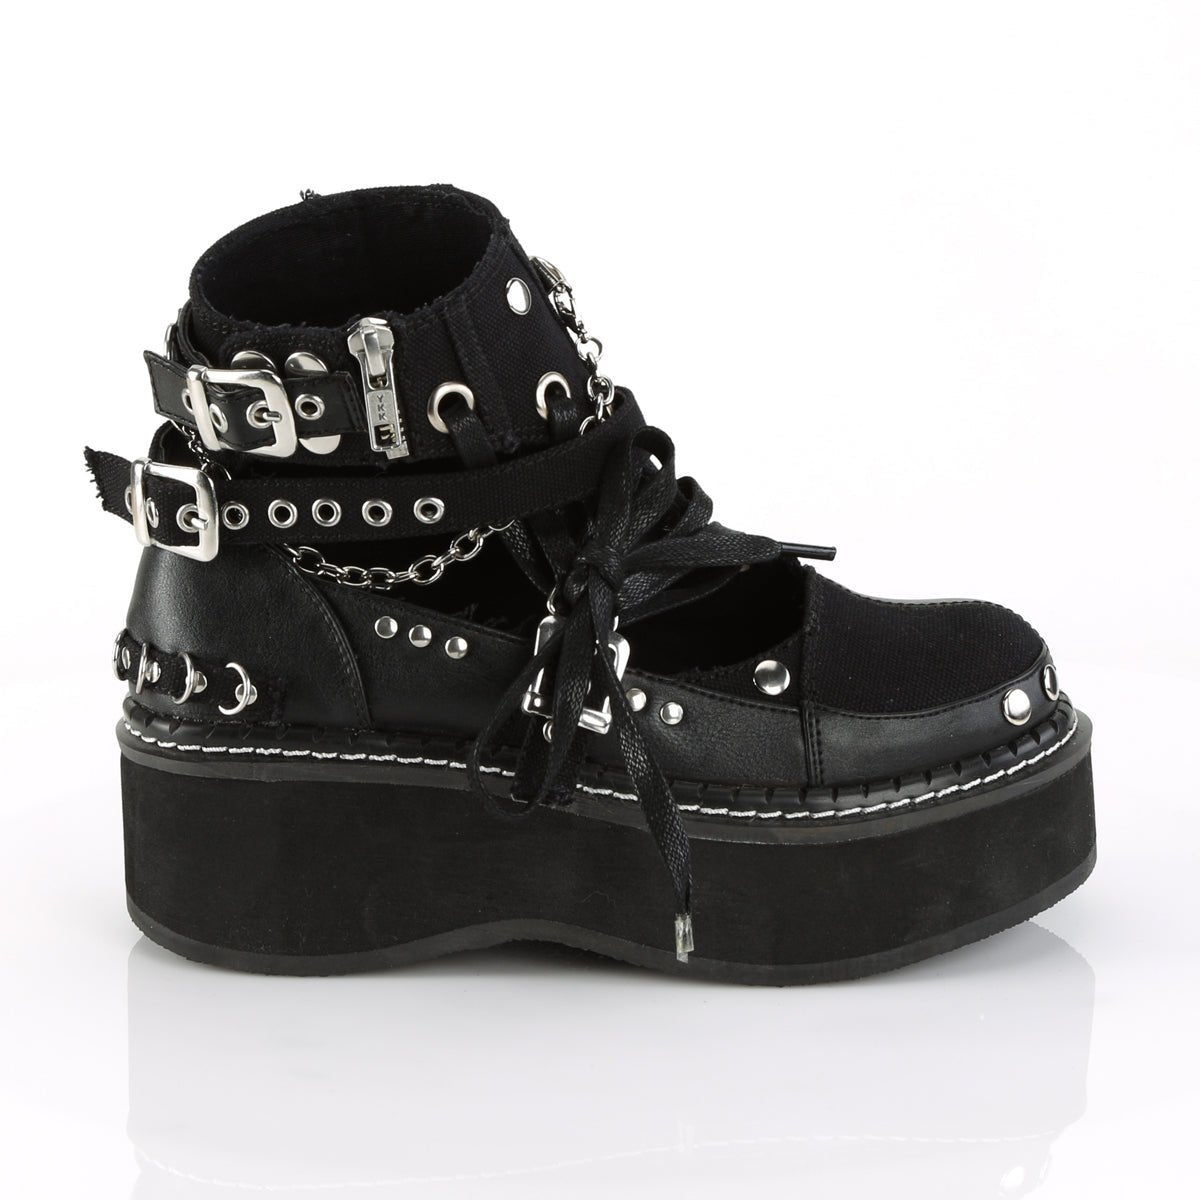 Too Fast | Demonia Emily 317 | Black Canvas & Vegan Leather Women's Ankle Boots